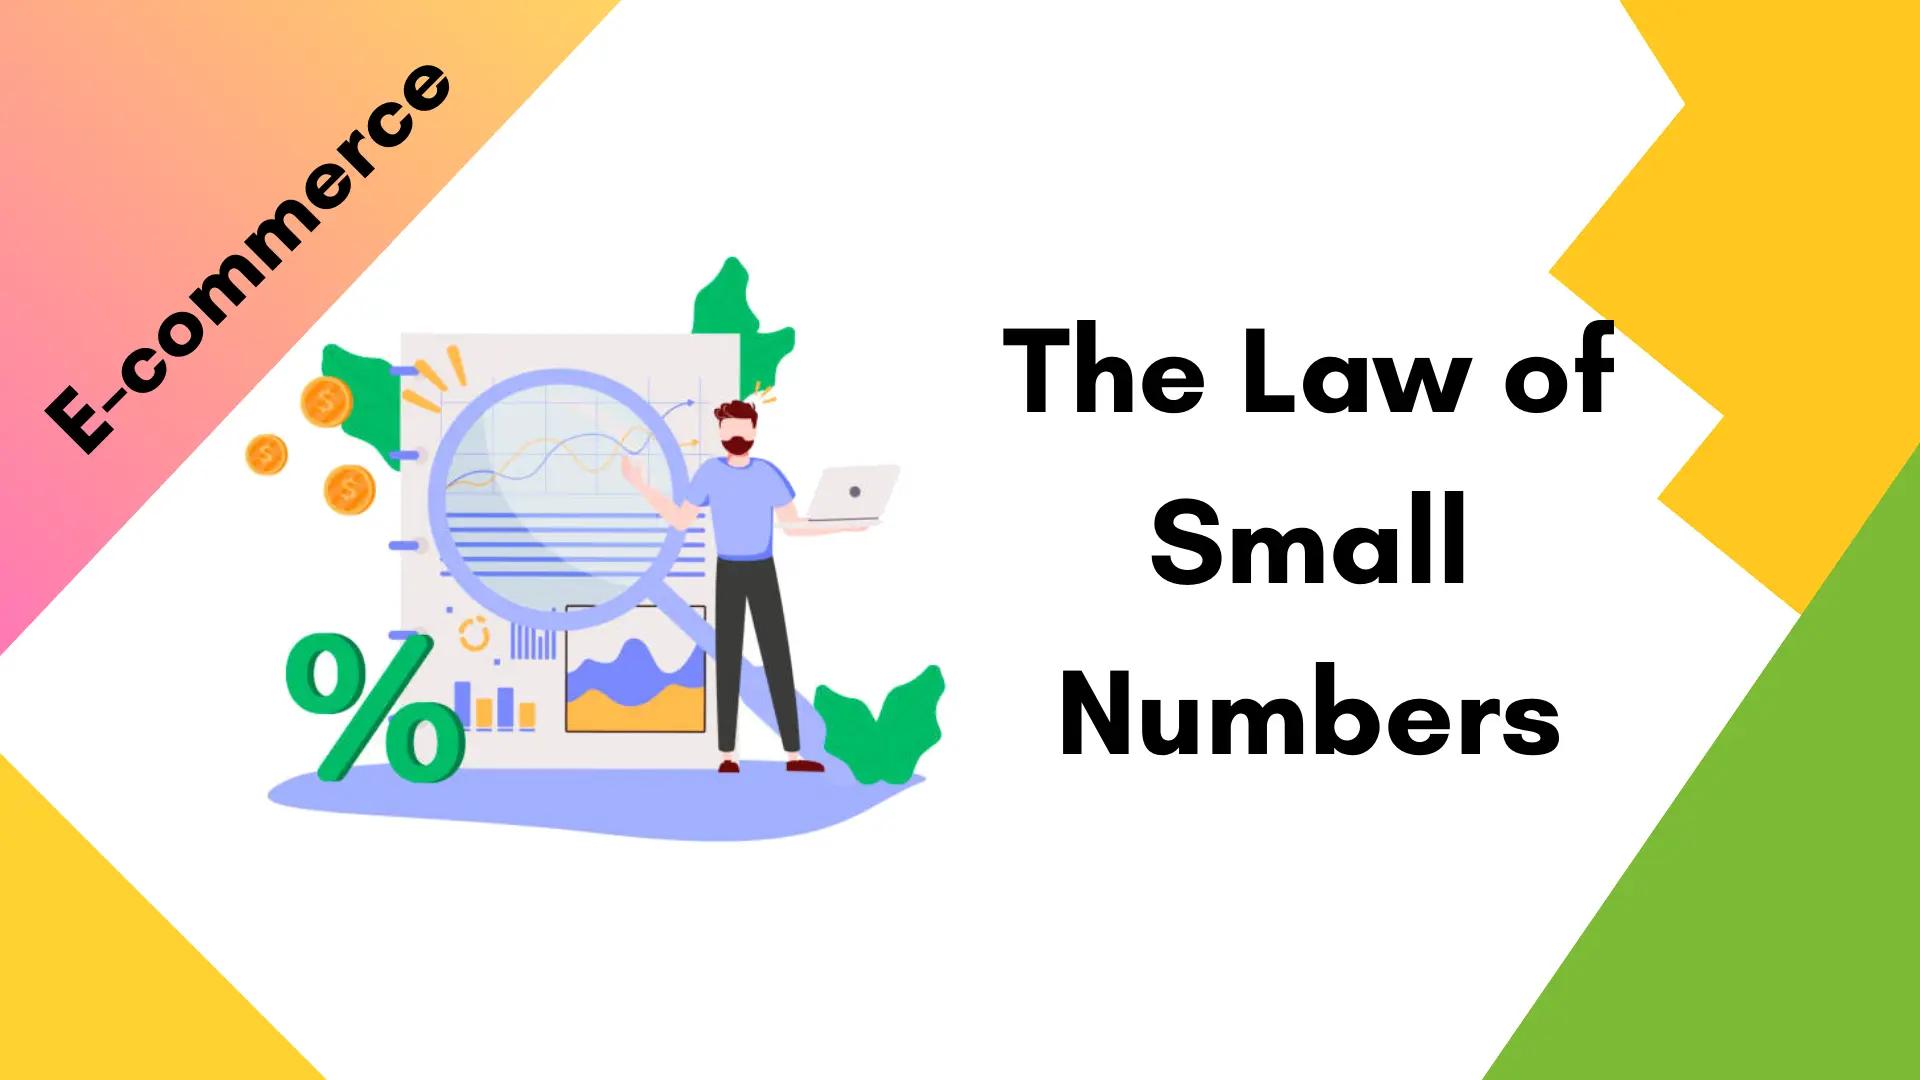 The Law of Small Numbers